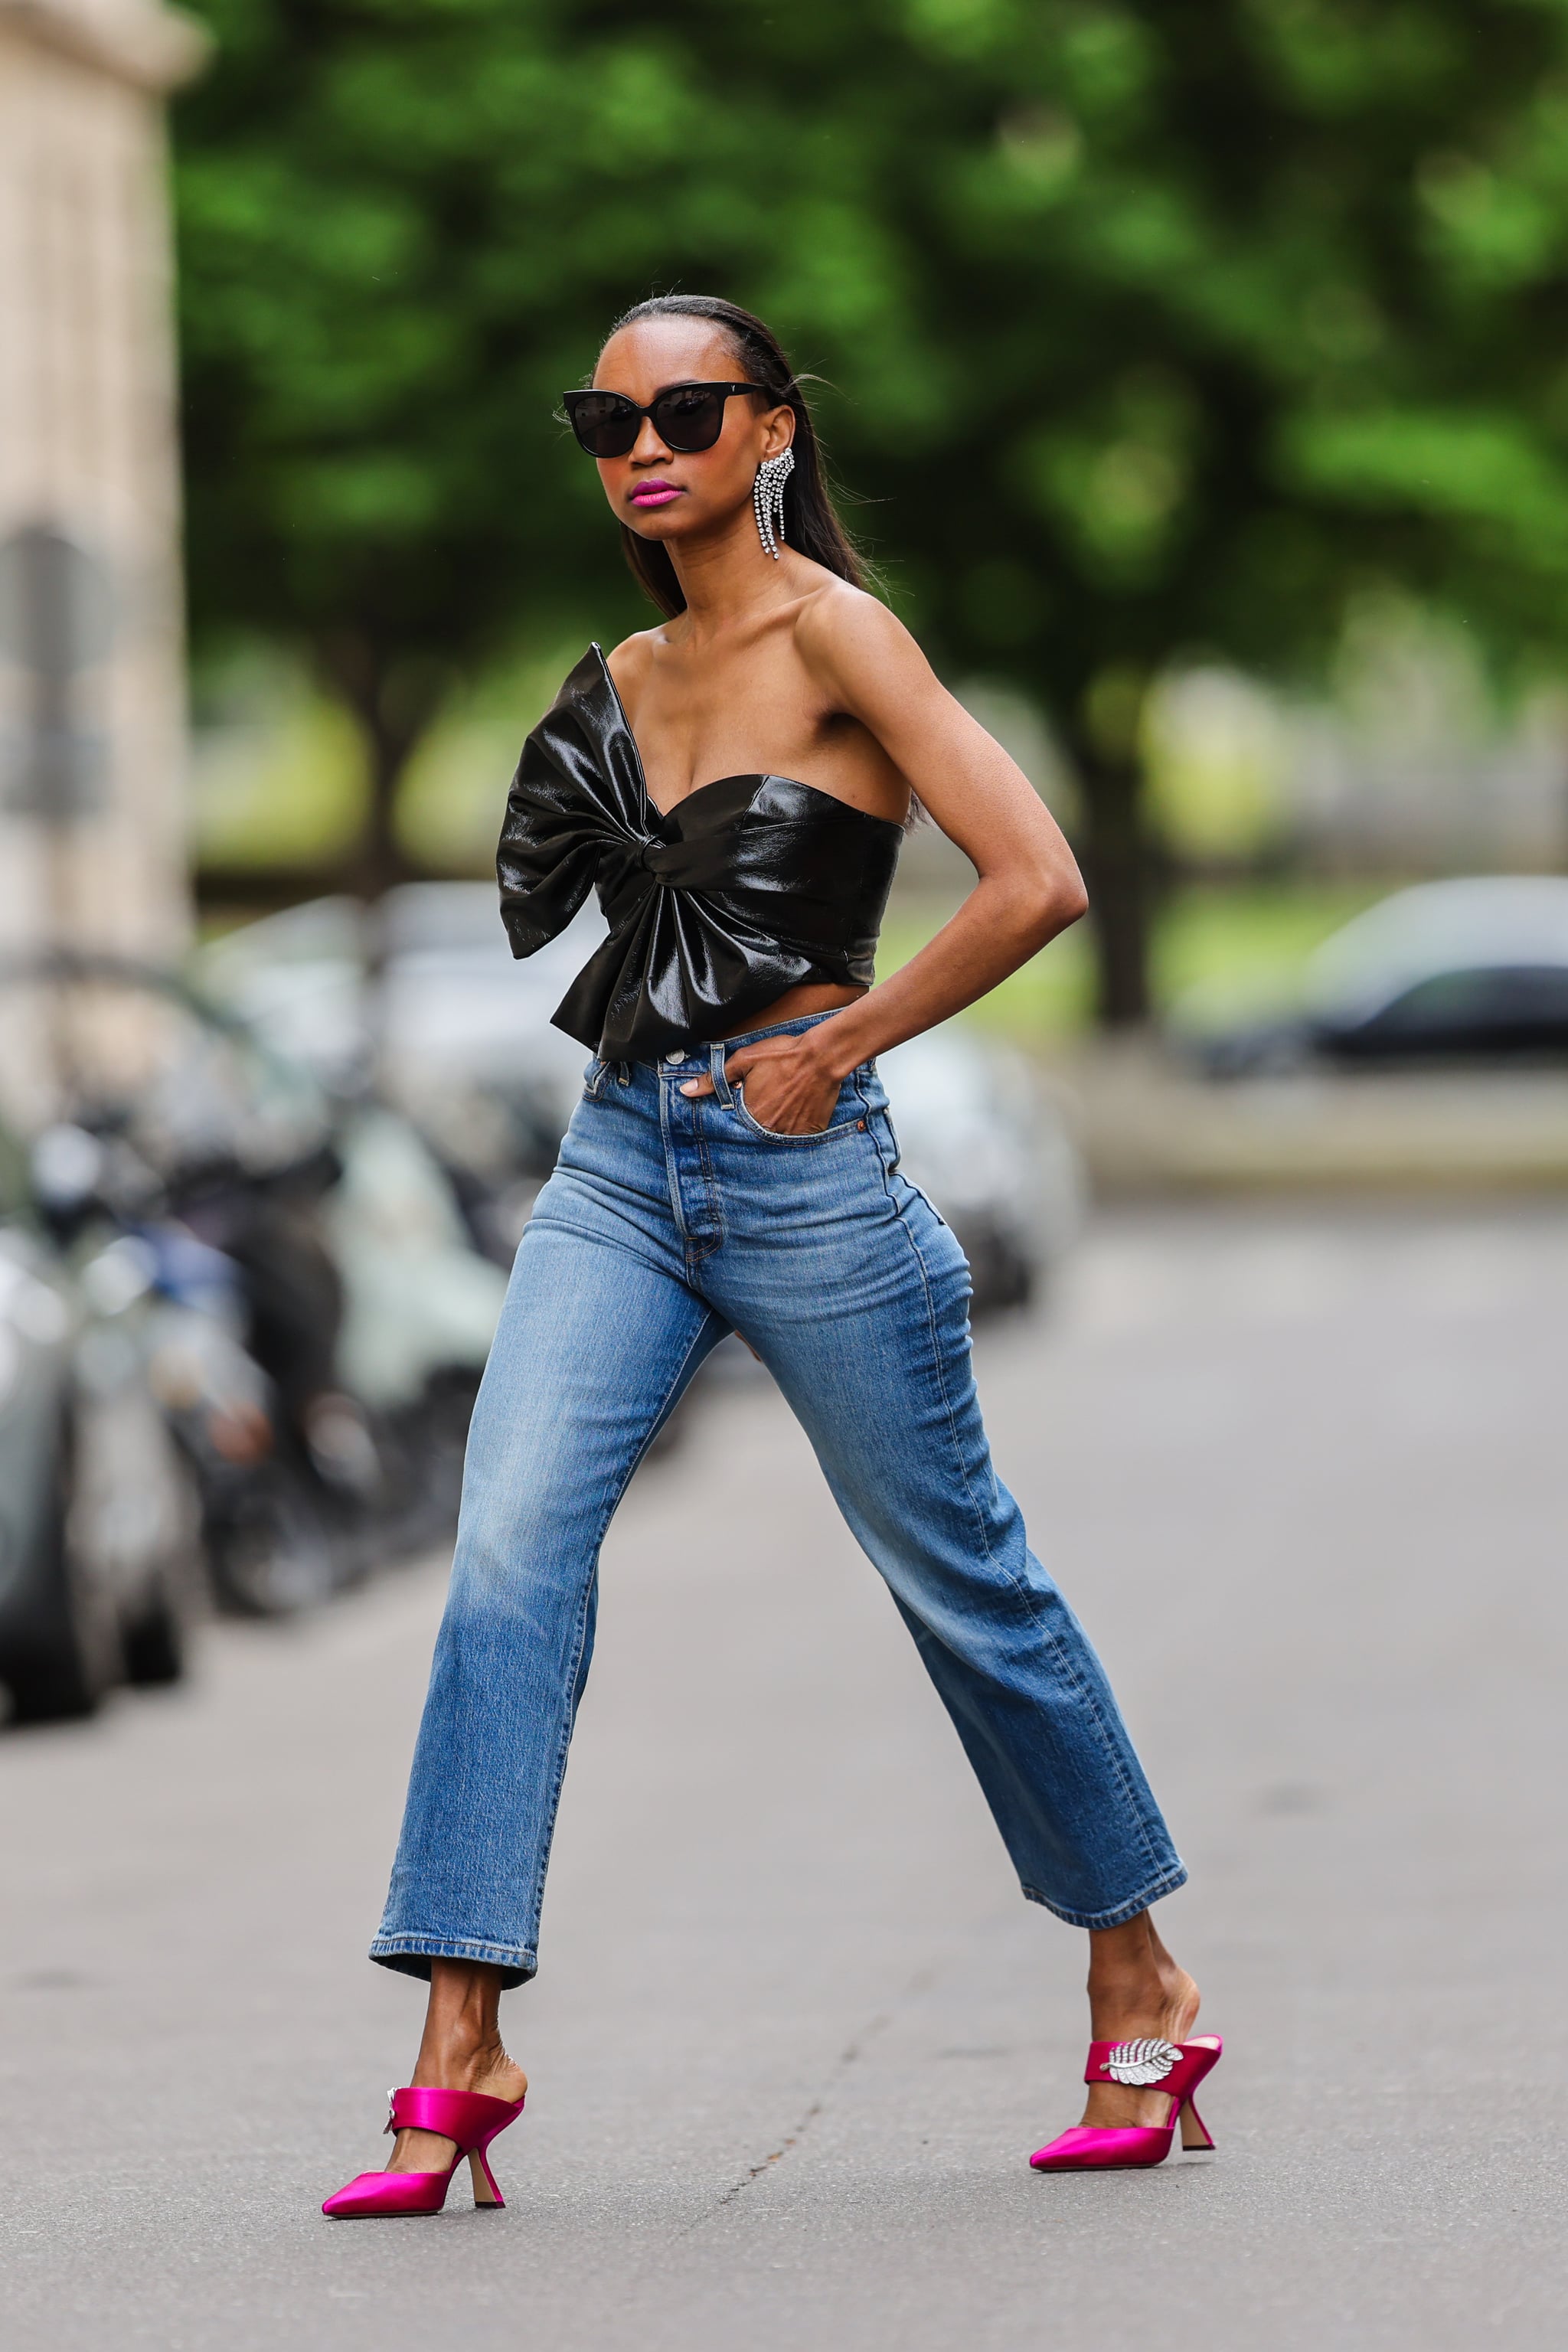 All I Want to Wear This Summer Is a Corset With Jeans - Fashionista